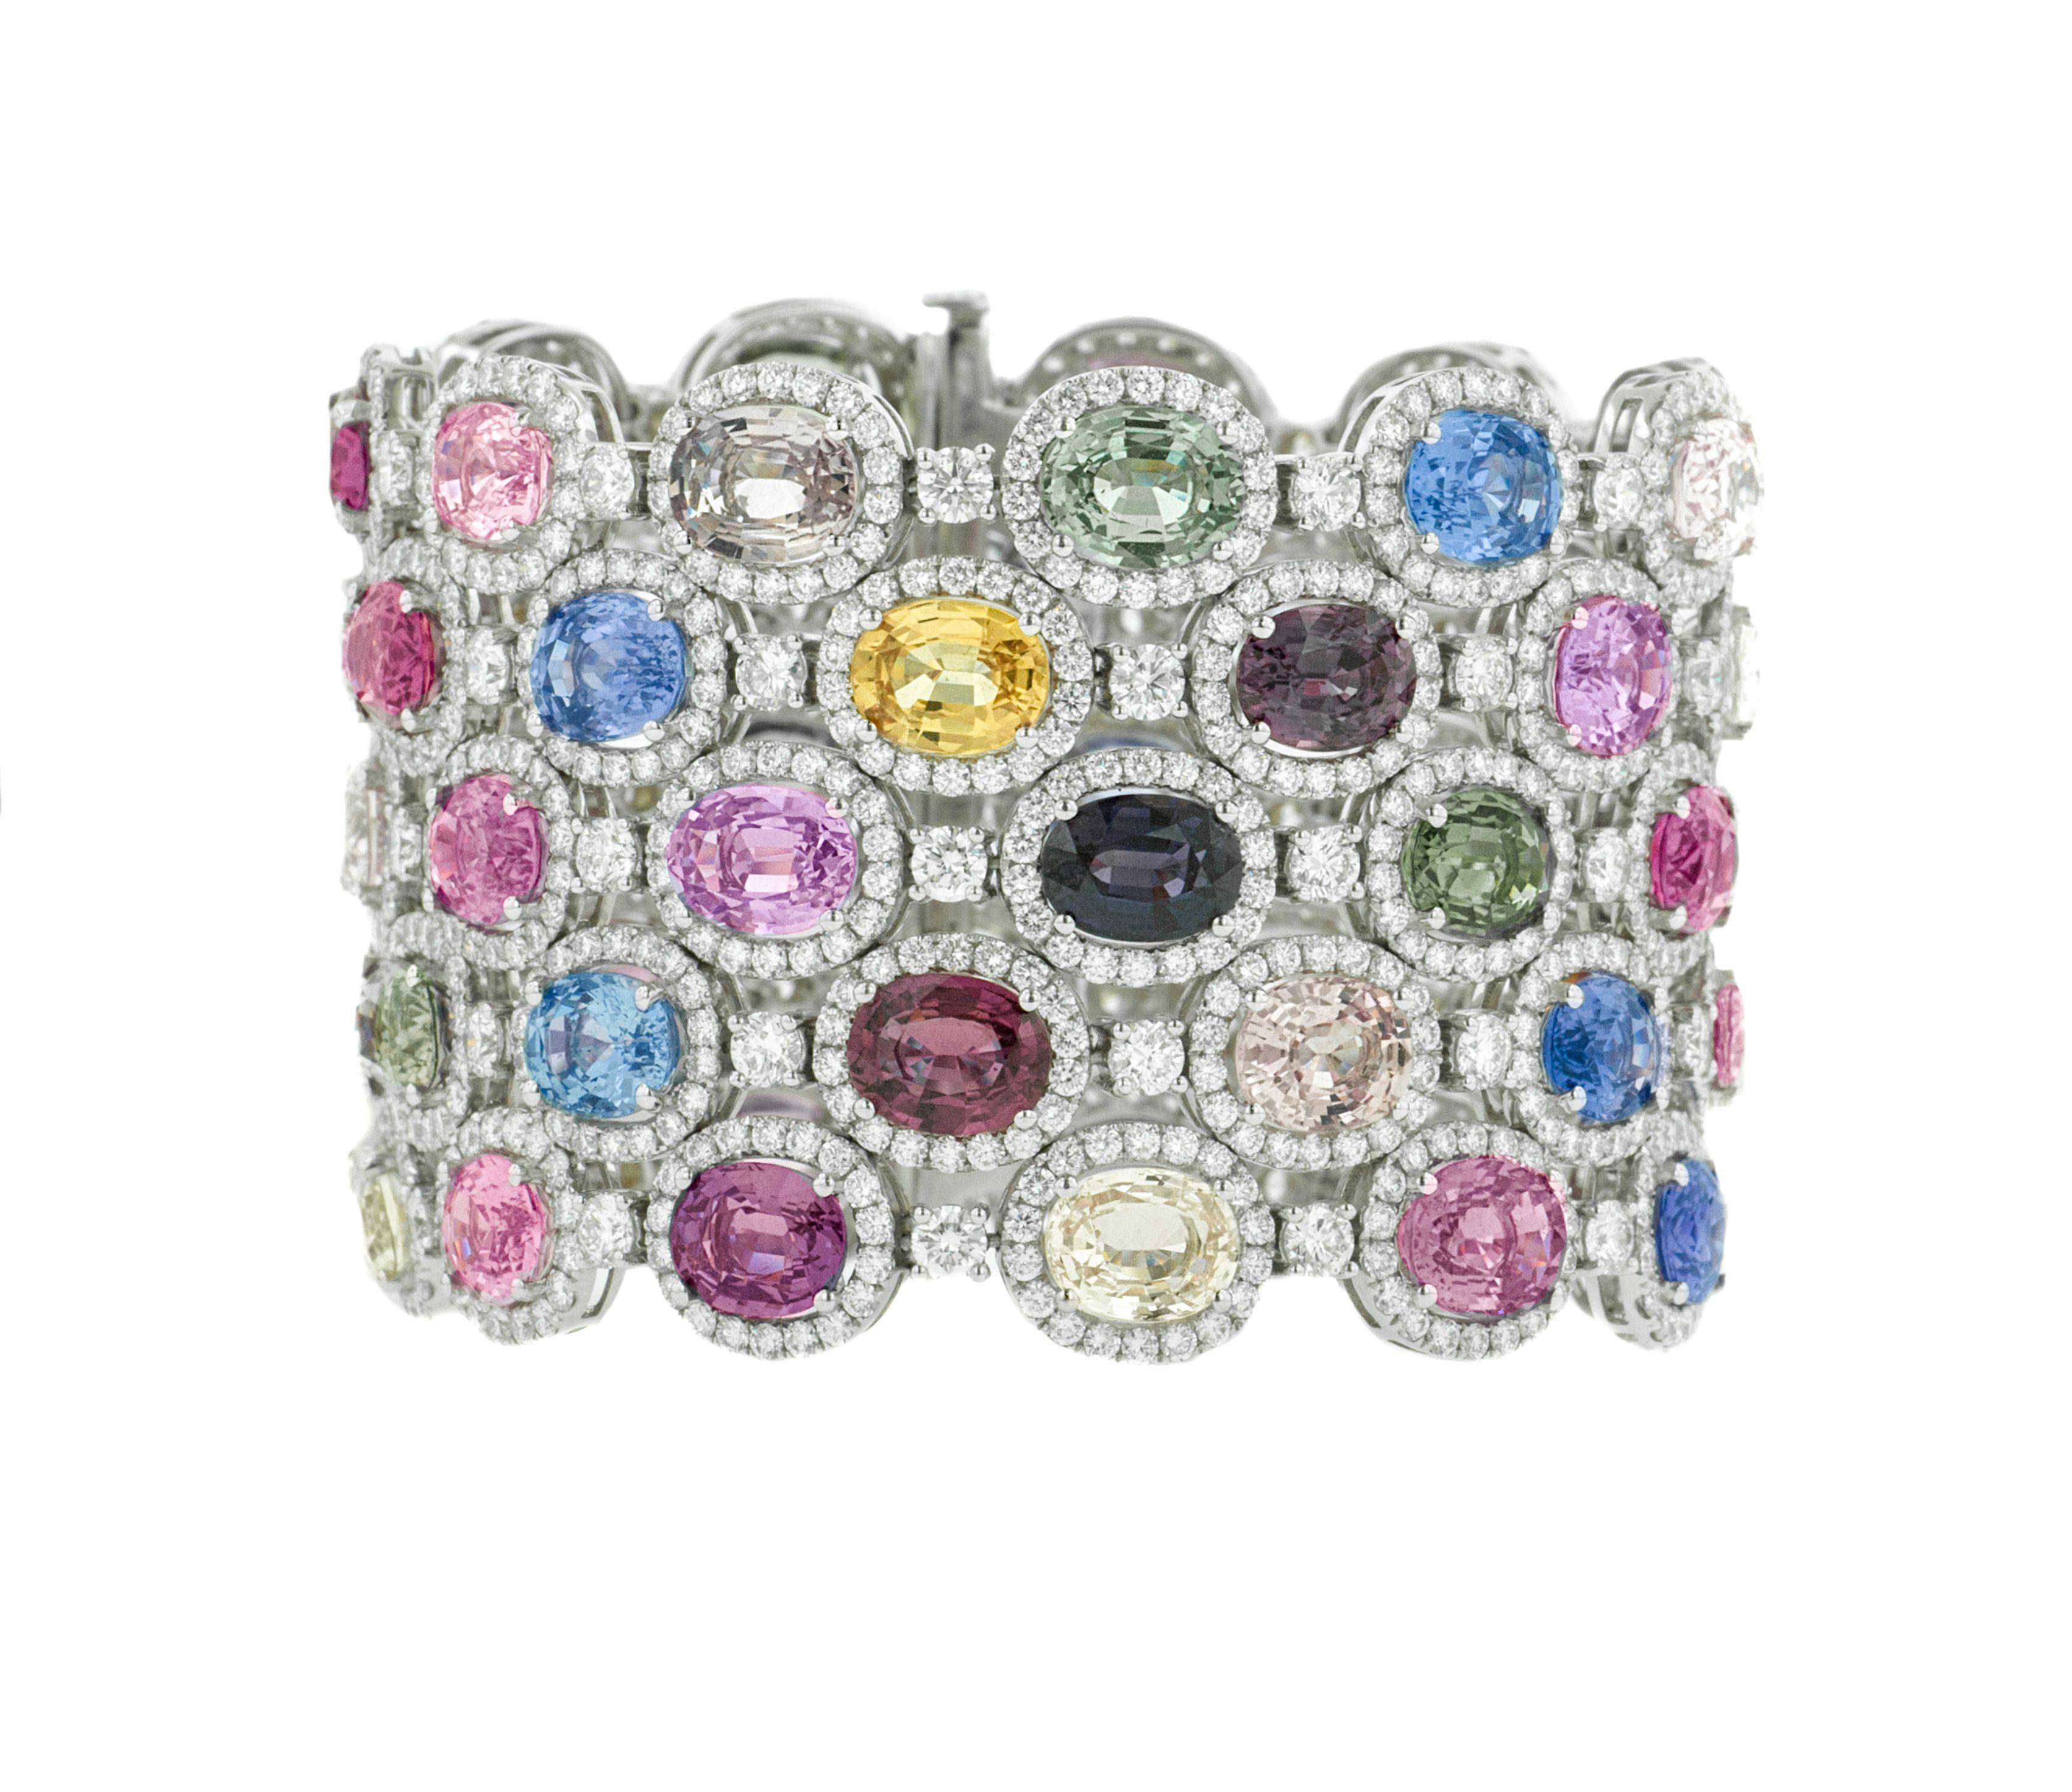  Sapphire and diamond bracelet adorned with 121.00 cts tw of unheated multicolor oval cut sapphires surrounded by 28.50 cts tw of diamonds packed hexagonally in a 18 kt white gold bracelet (VS clarity)